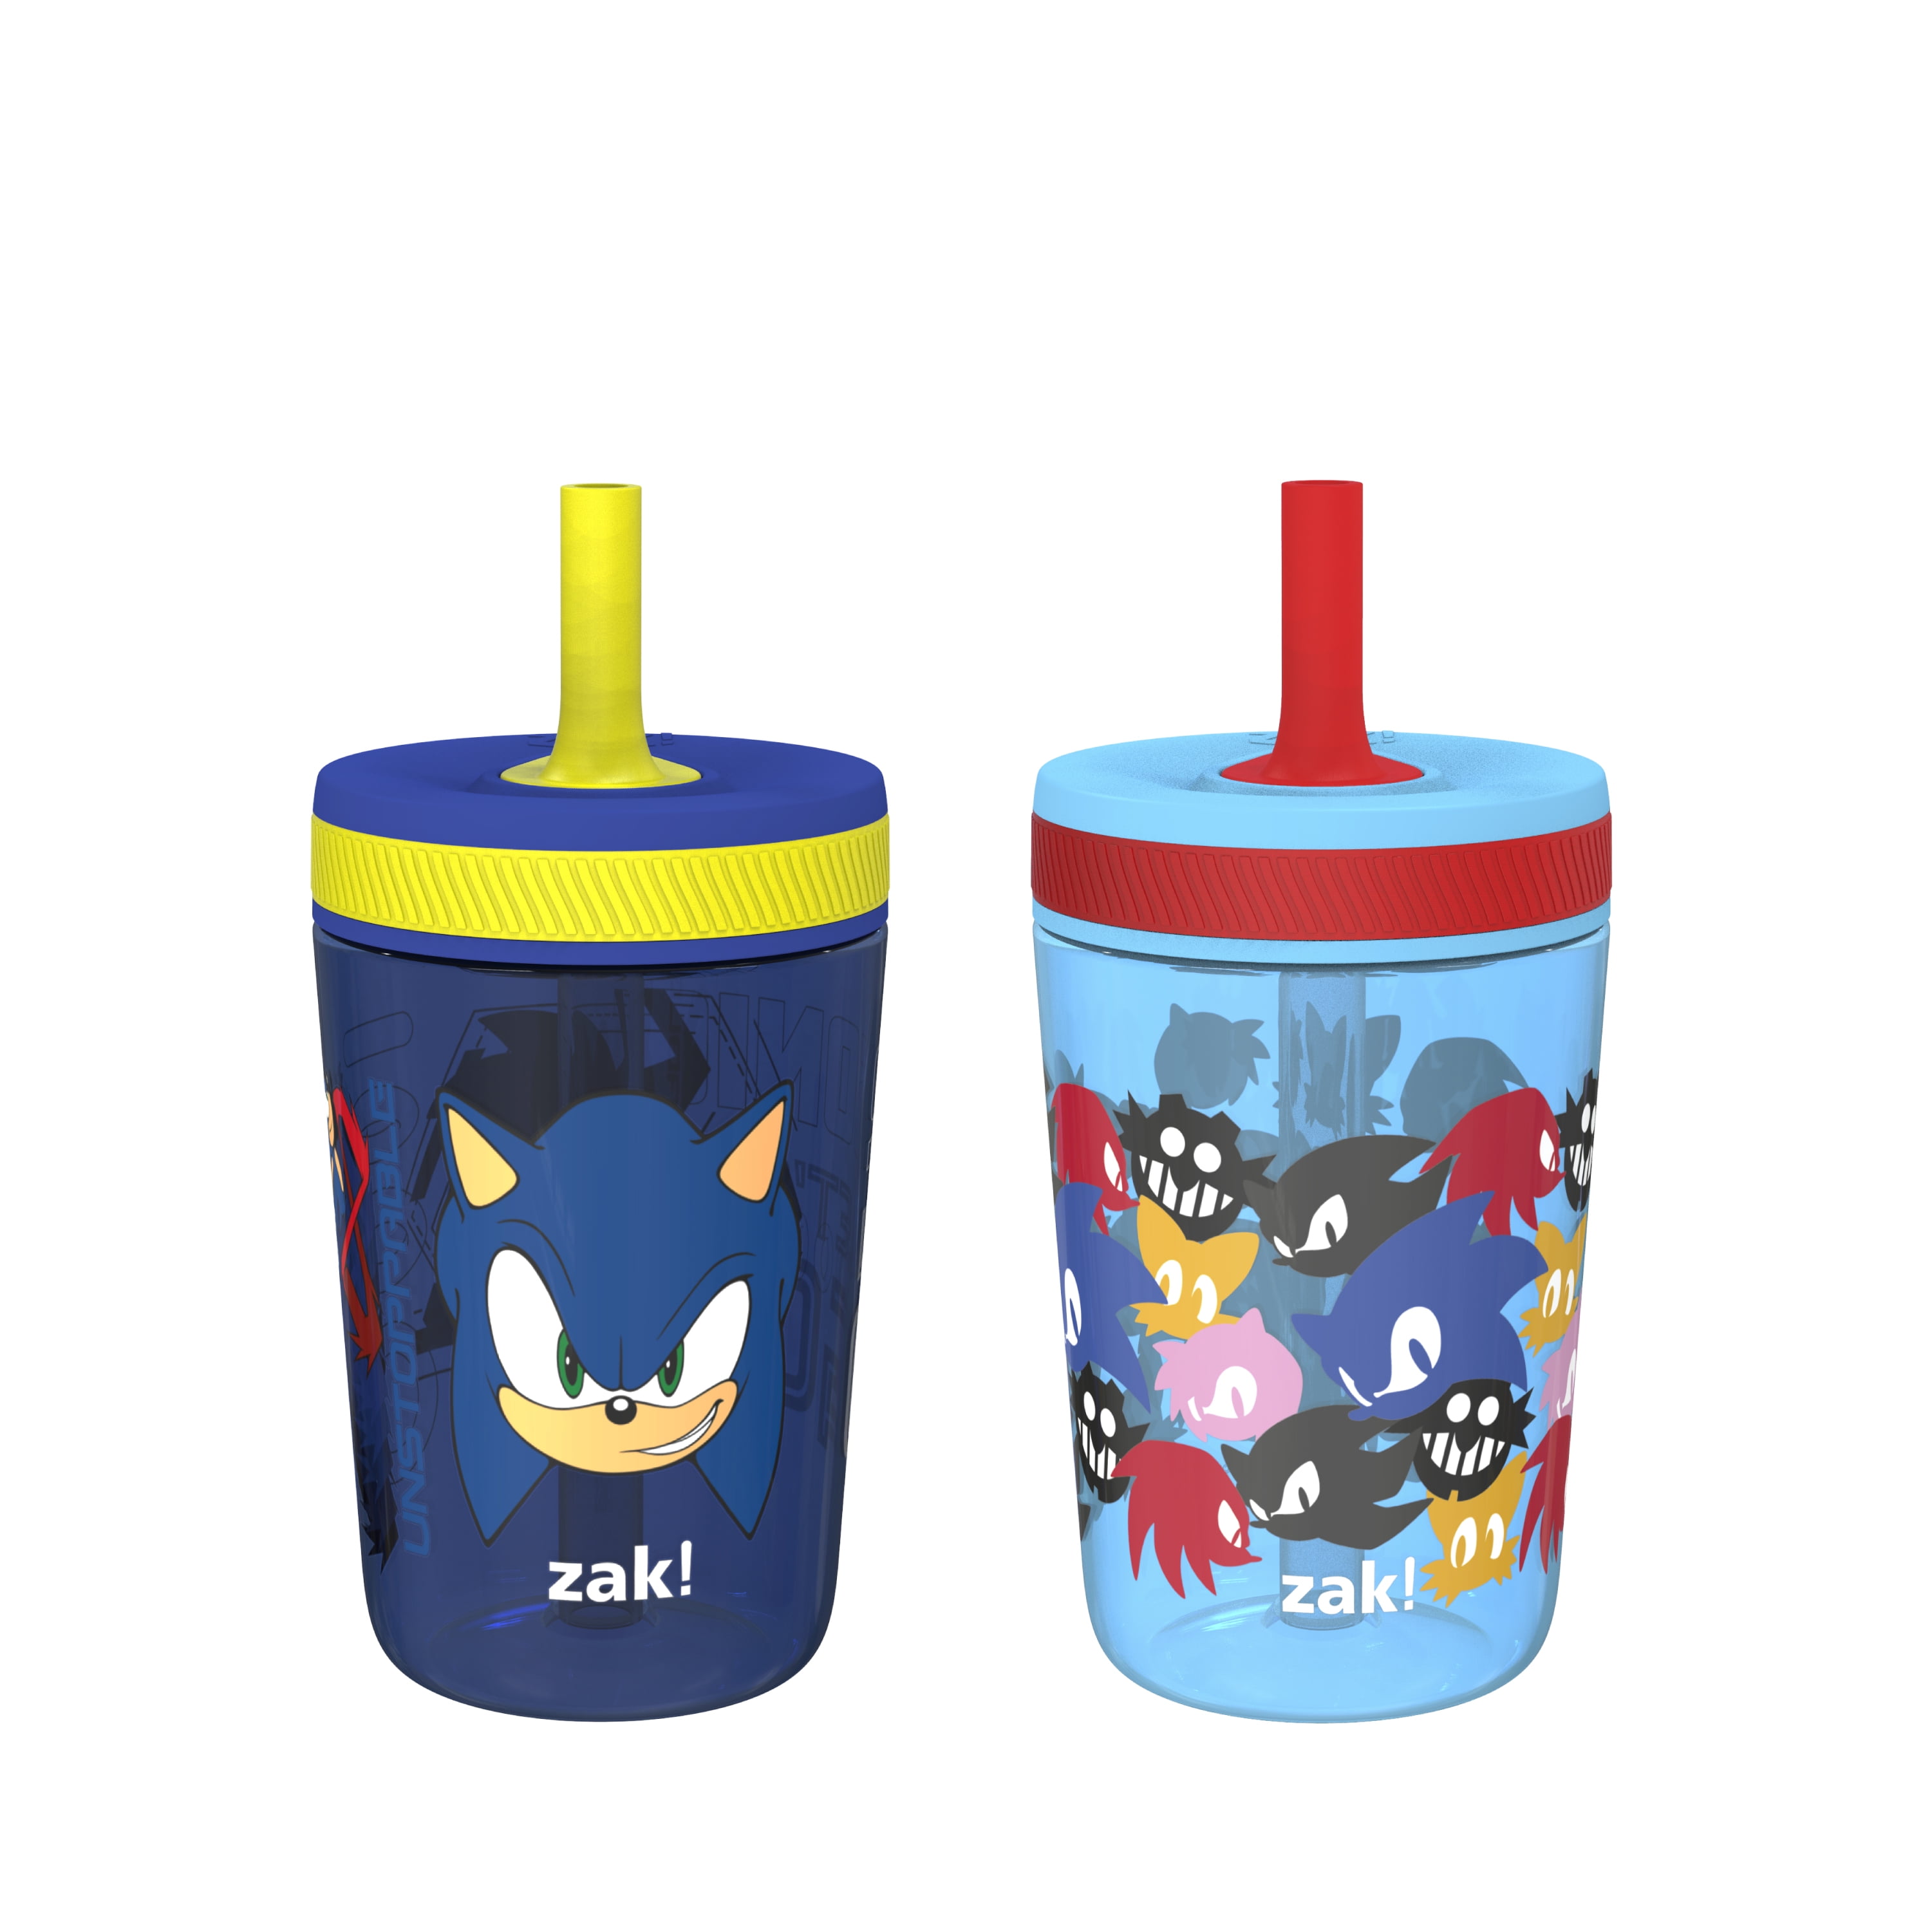 Zak Designs Blippi Kelso Toddler Cups for Travel or at Home, 15oz 2-Pack Durable Plastic Sippy Cups with Leak-Proof Design Is Perfect for Kids